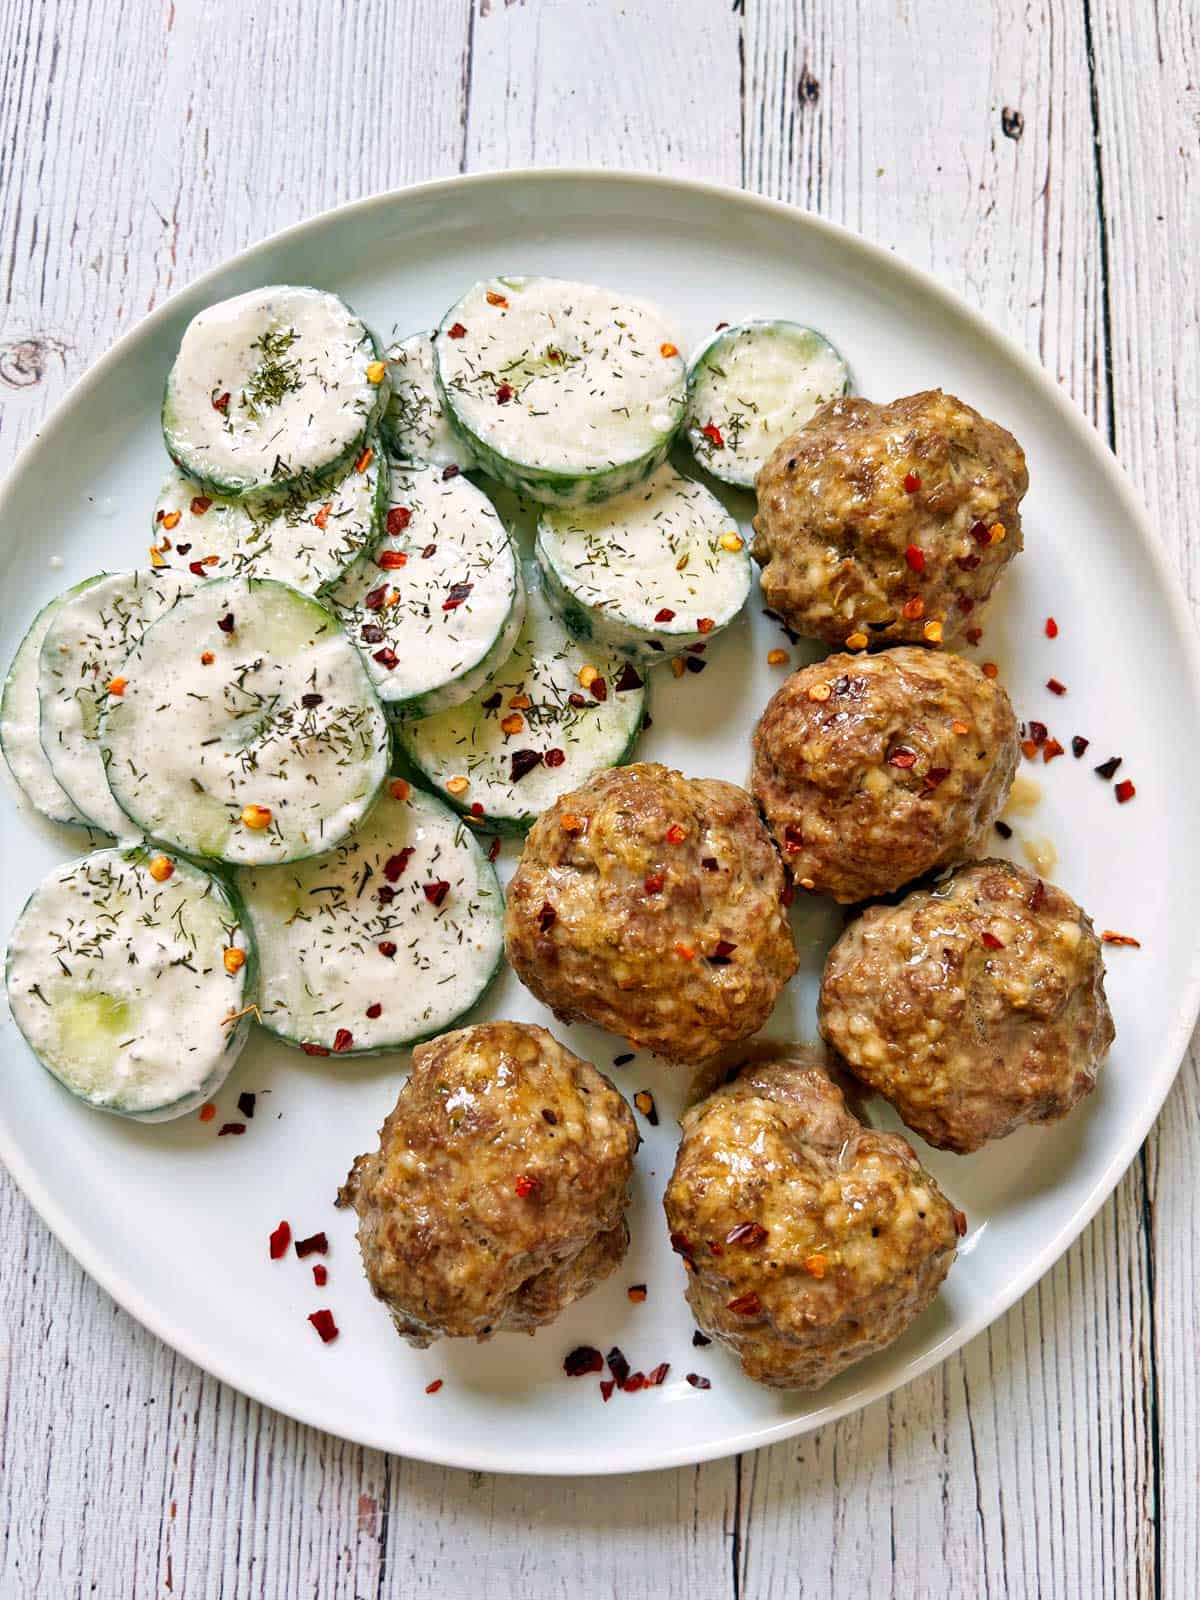 Creamy cucumber salad is served as a side dish to meatballs.